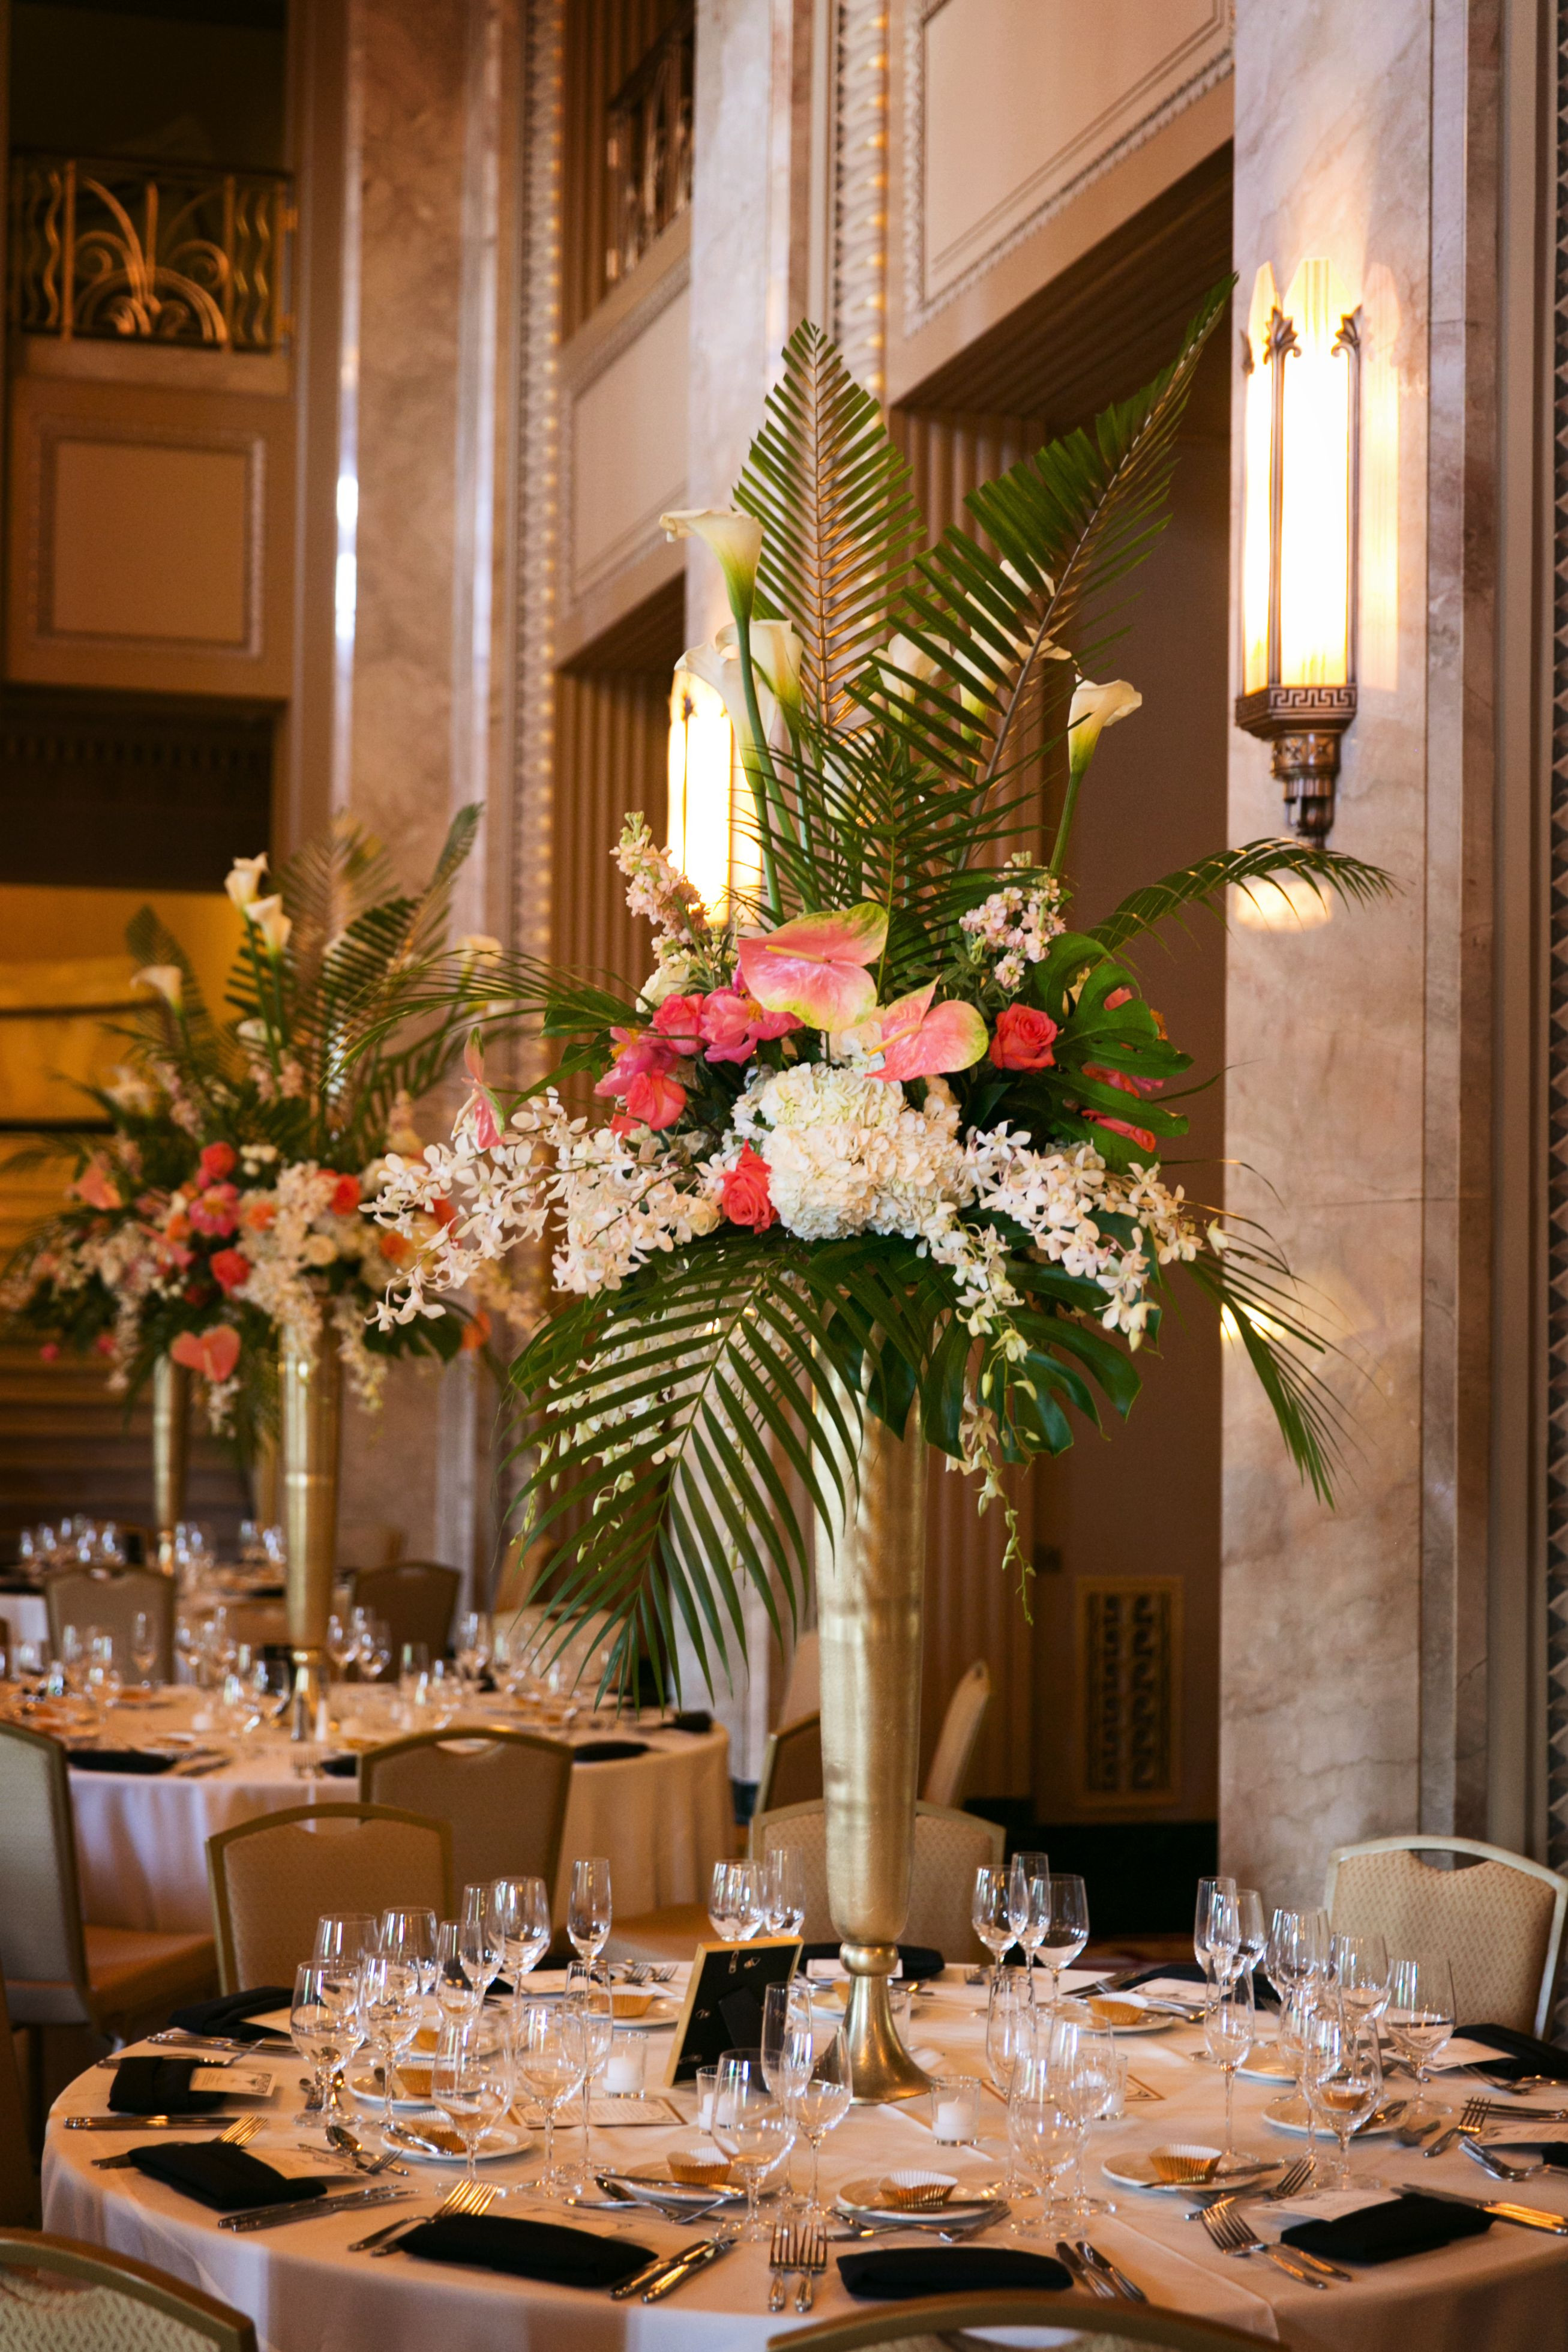 tall gold vases bulk of we wanted the centerpieces to be bold and modern with large scale intended for tall gold vases we wanted the centerpieces to be bold and modern with large scale elements complimentary